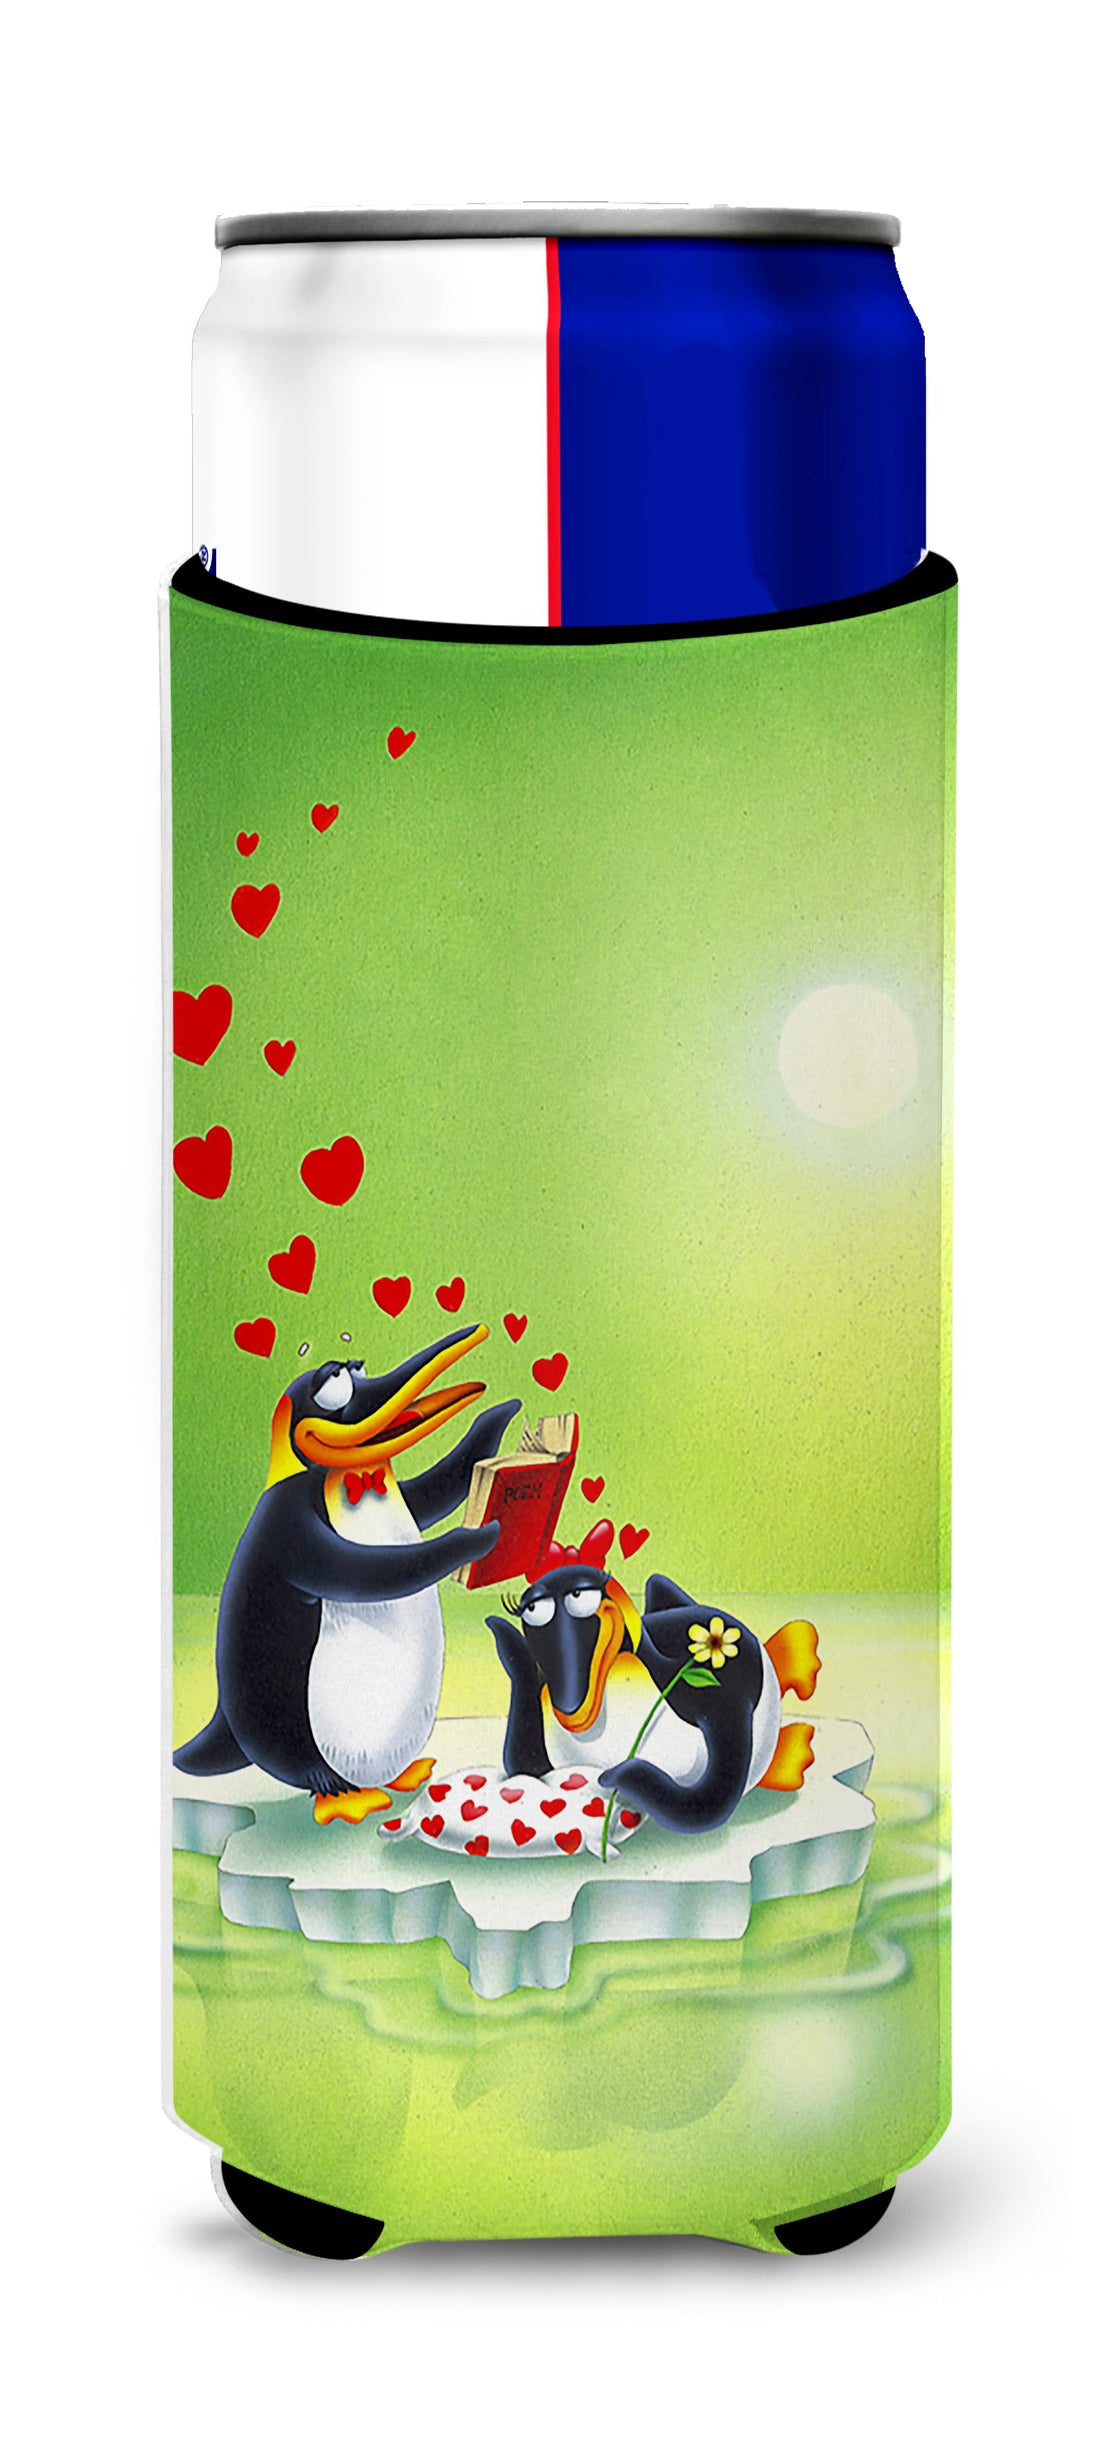 My Love Song Penguins  Ultra Beverage Insulators for slim cans APH0246MUK